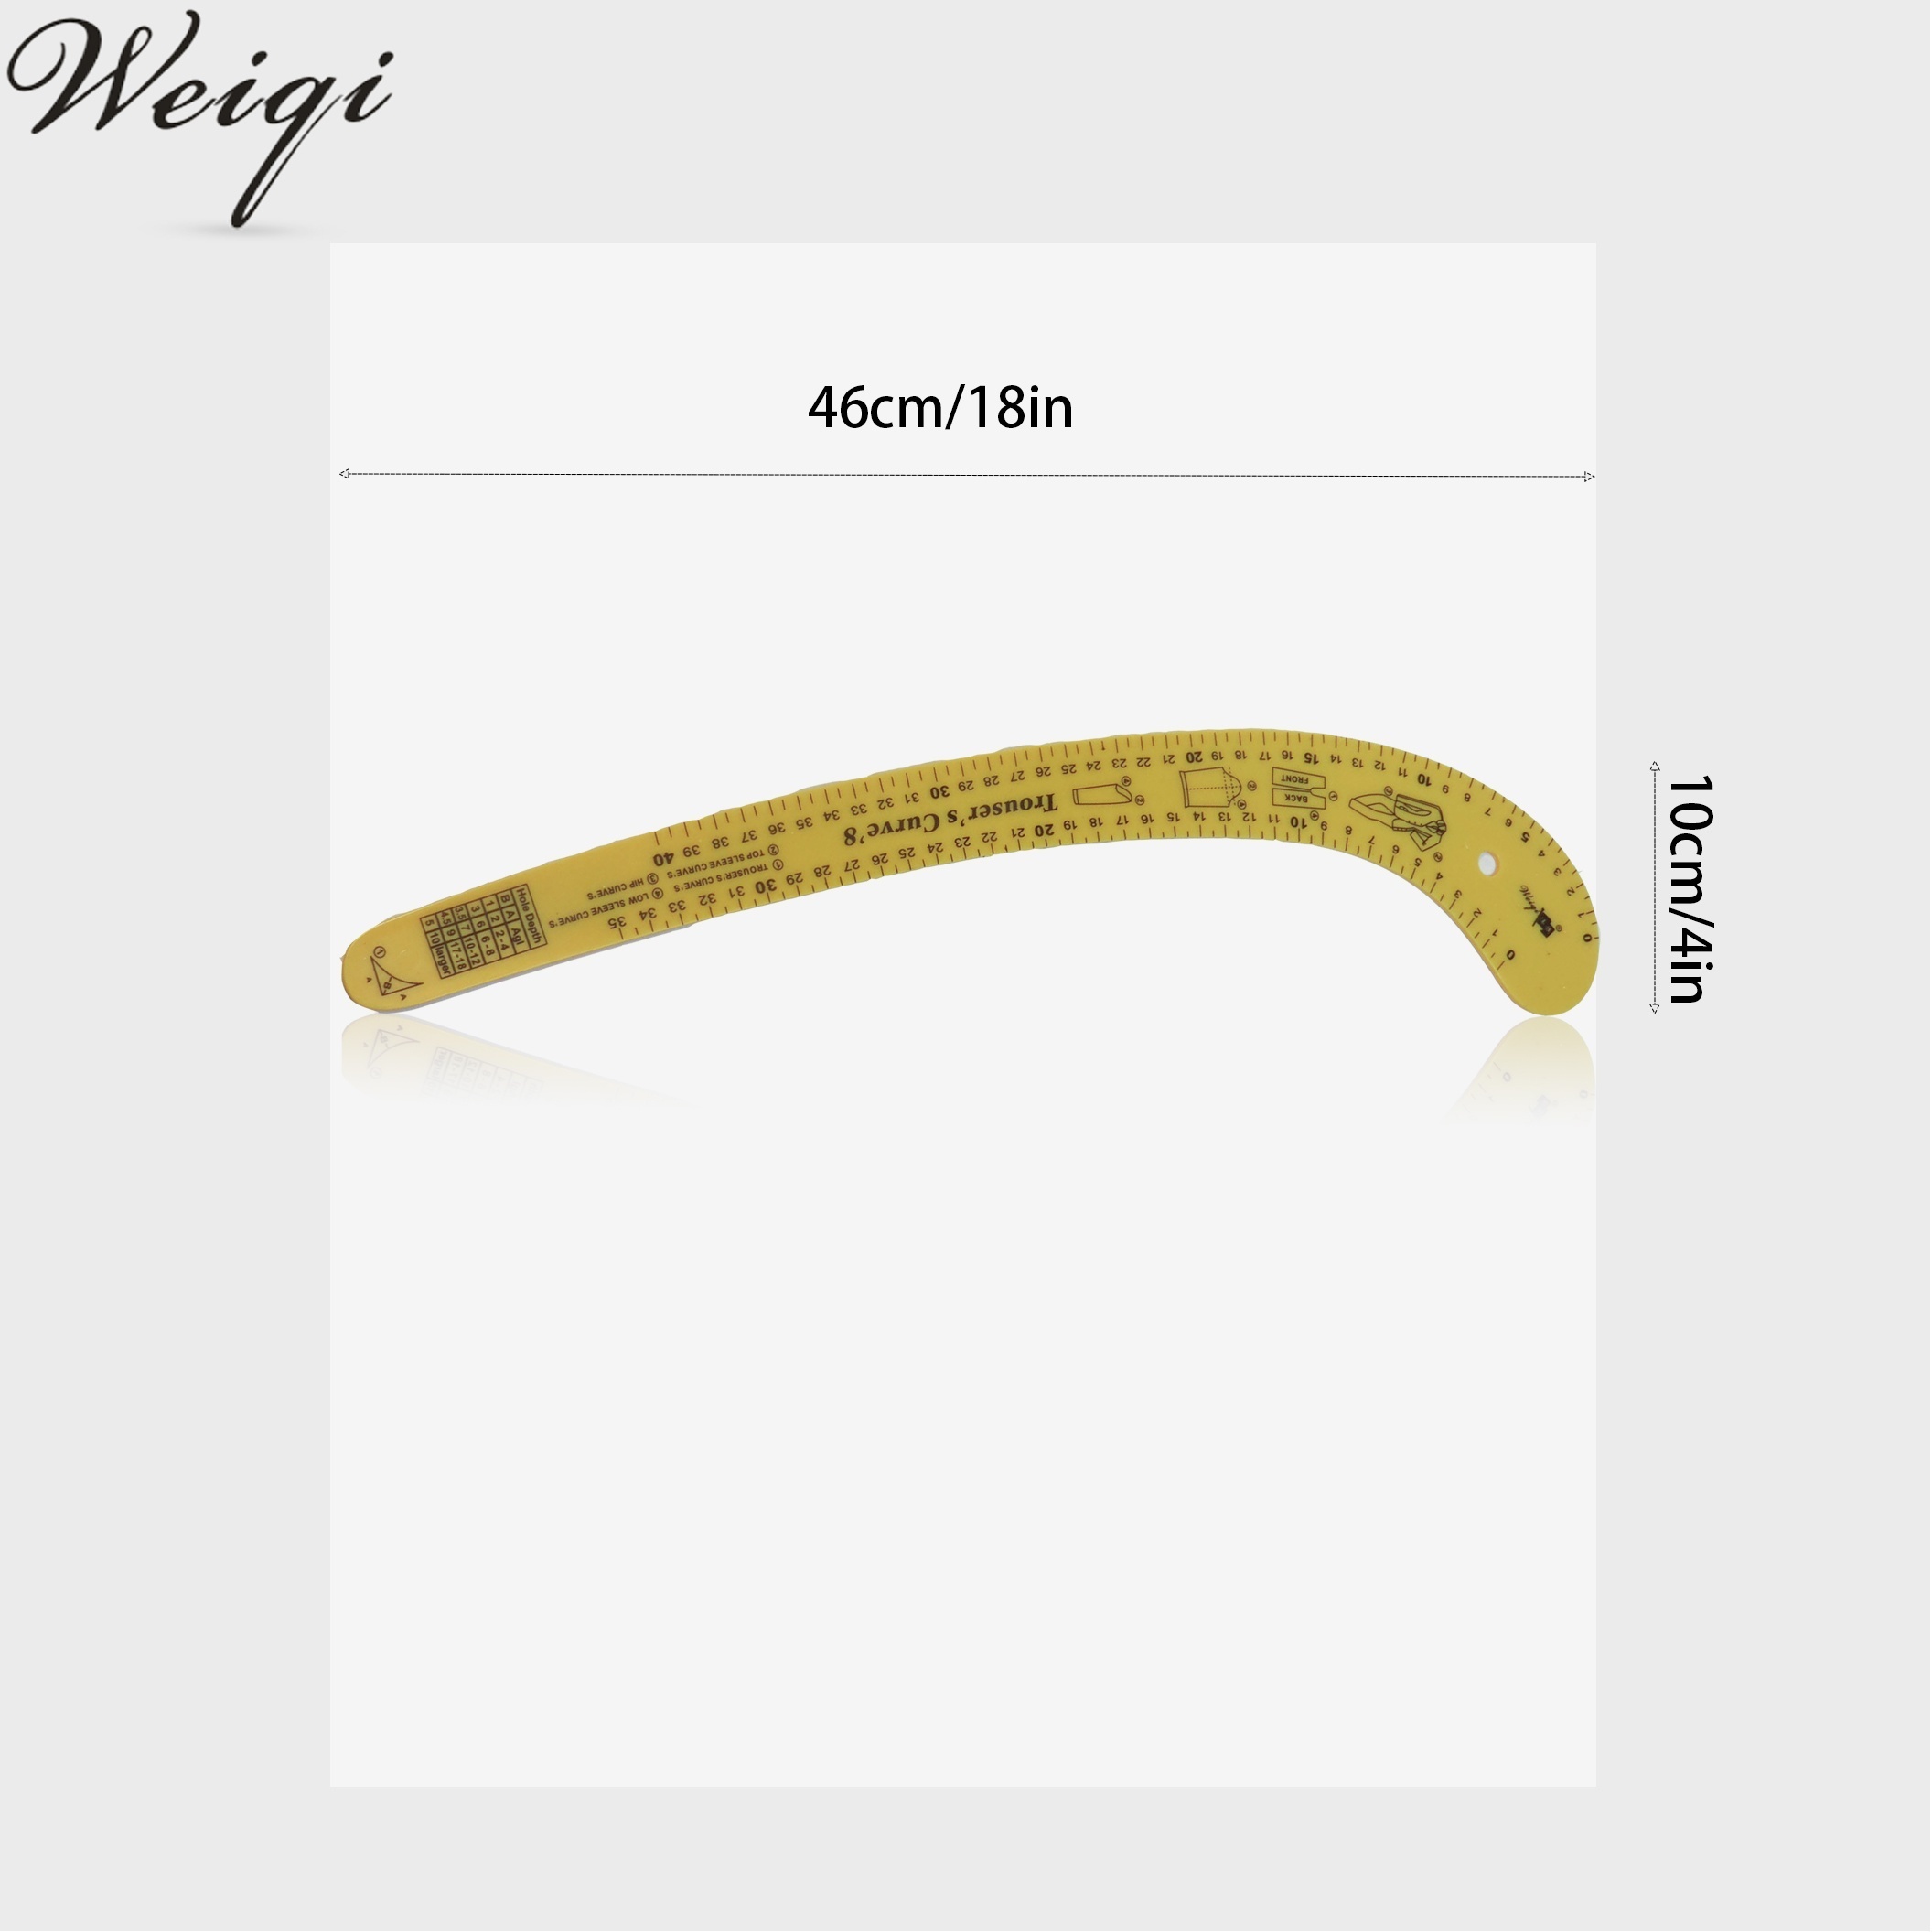 Metric Sewing Ruler French Curve for Pattern Making Drafting, Clear Acrylic Fashion Designer Ruler in cm , Trousers Curve, Size: As described